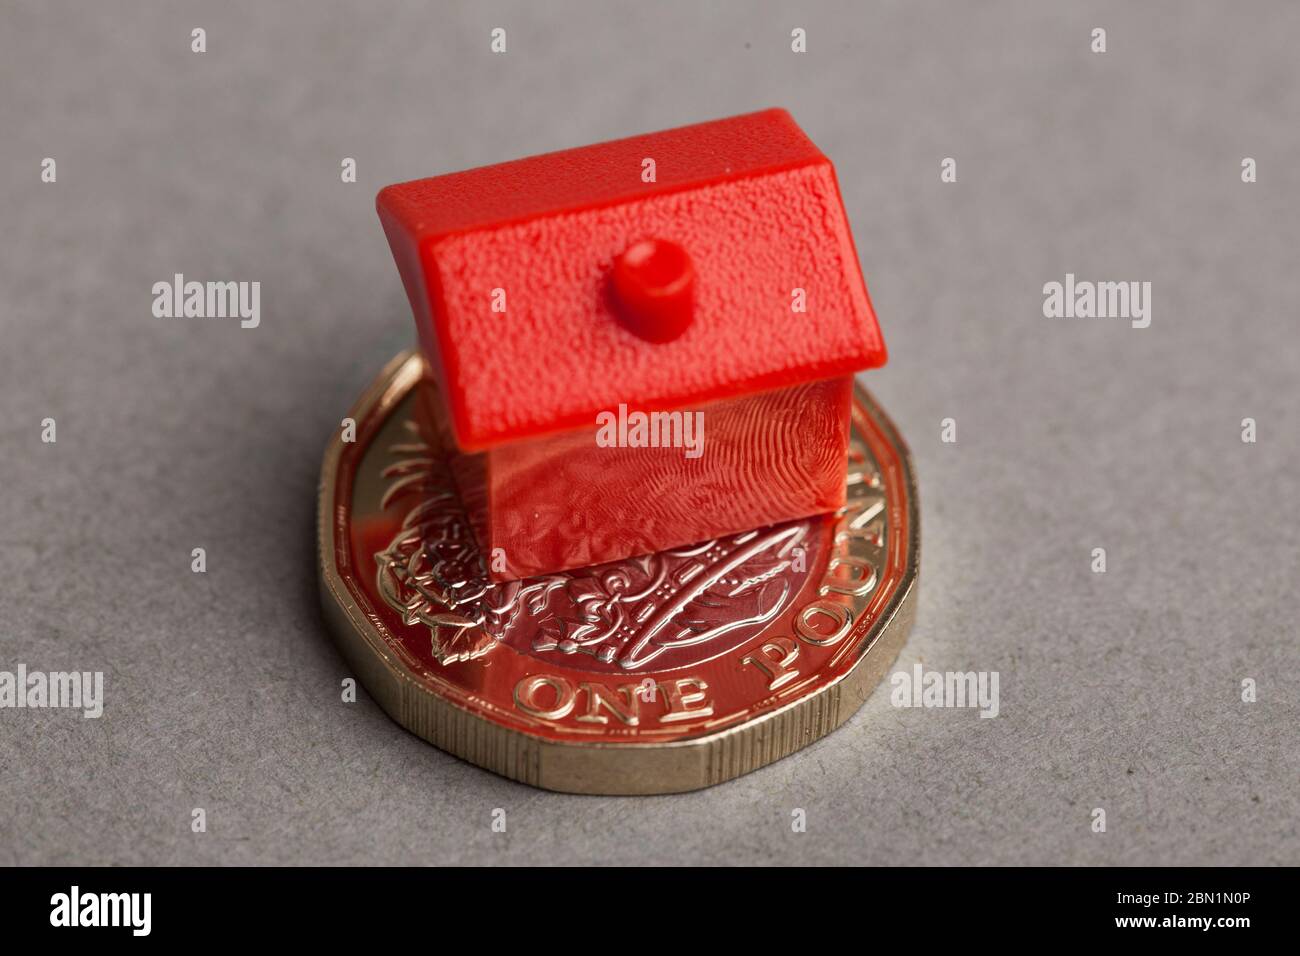 Red house on a british sterling one pound coin. Property price concept Stock Photo